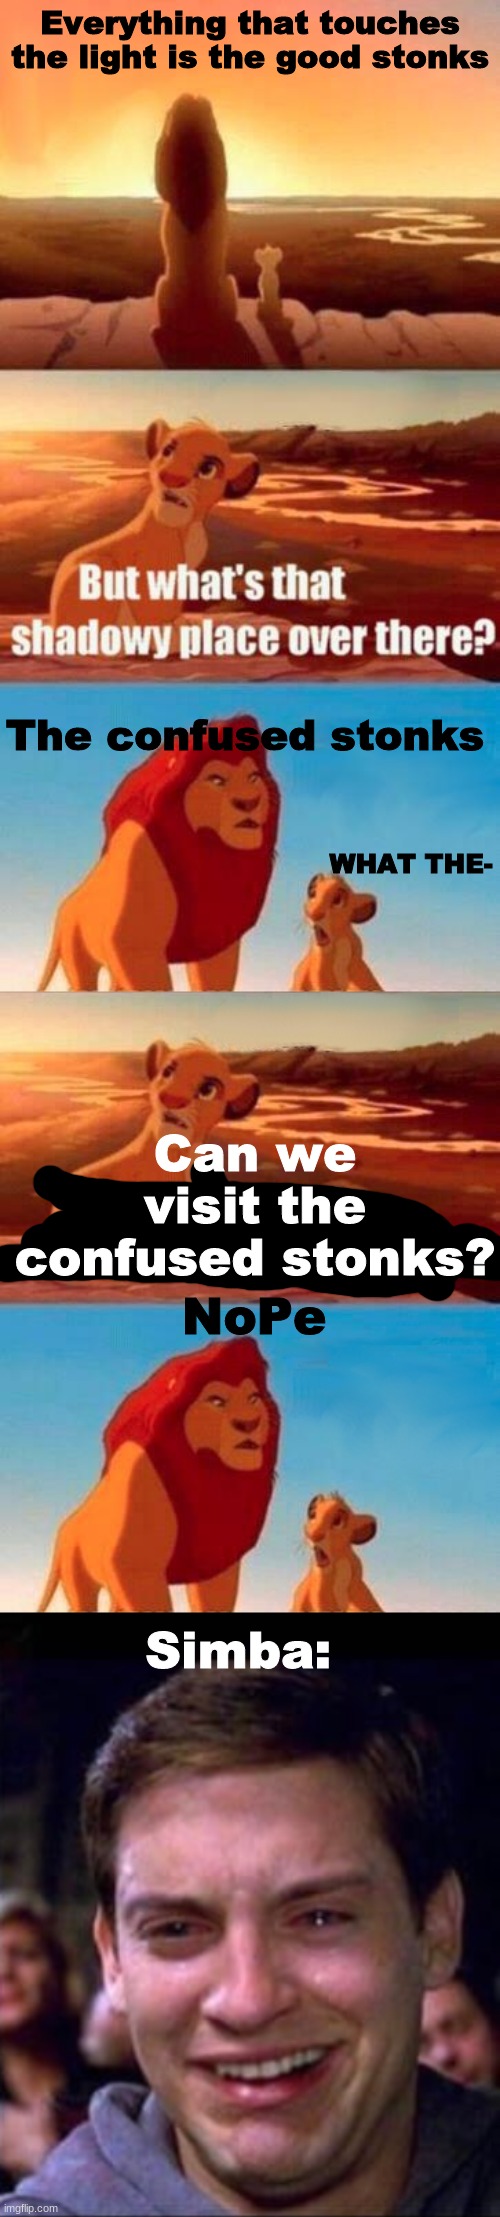 Image Title | Everything that touches the light is the good stonks; The confused stonks; WHAT THE-; Can we visit the confused stonks? NoPe; Simba: | image tagged in lion king light touches shadowy place kek,memes,simba shadowy place,long meme,oof | made w/ Imgflip meme maker